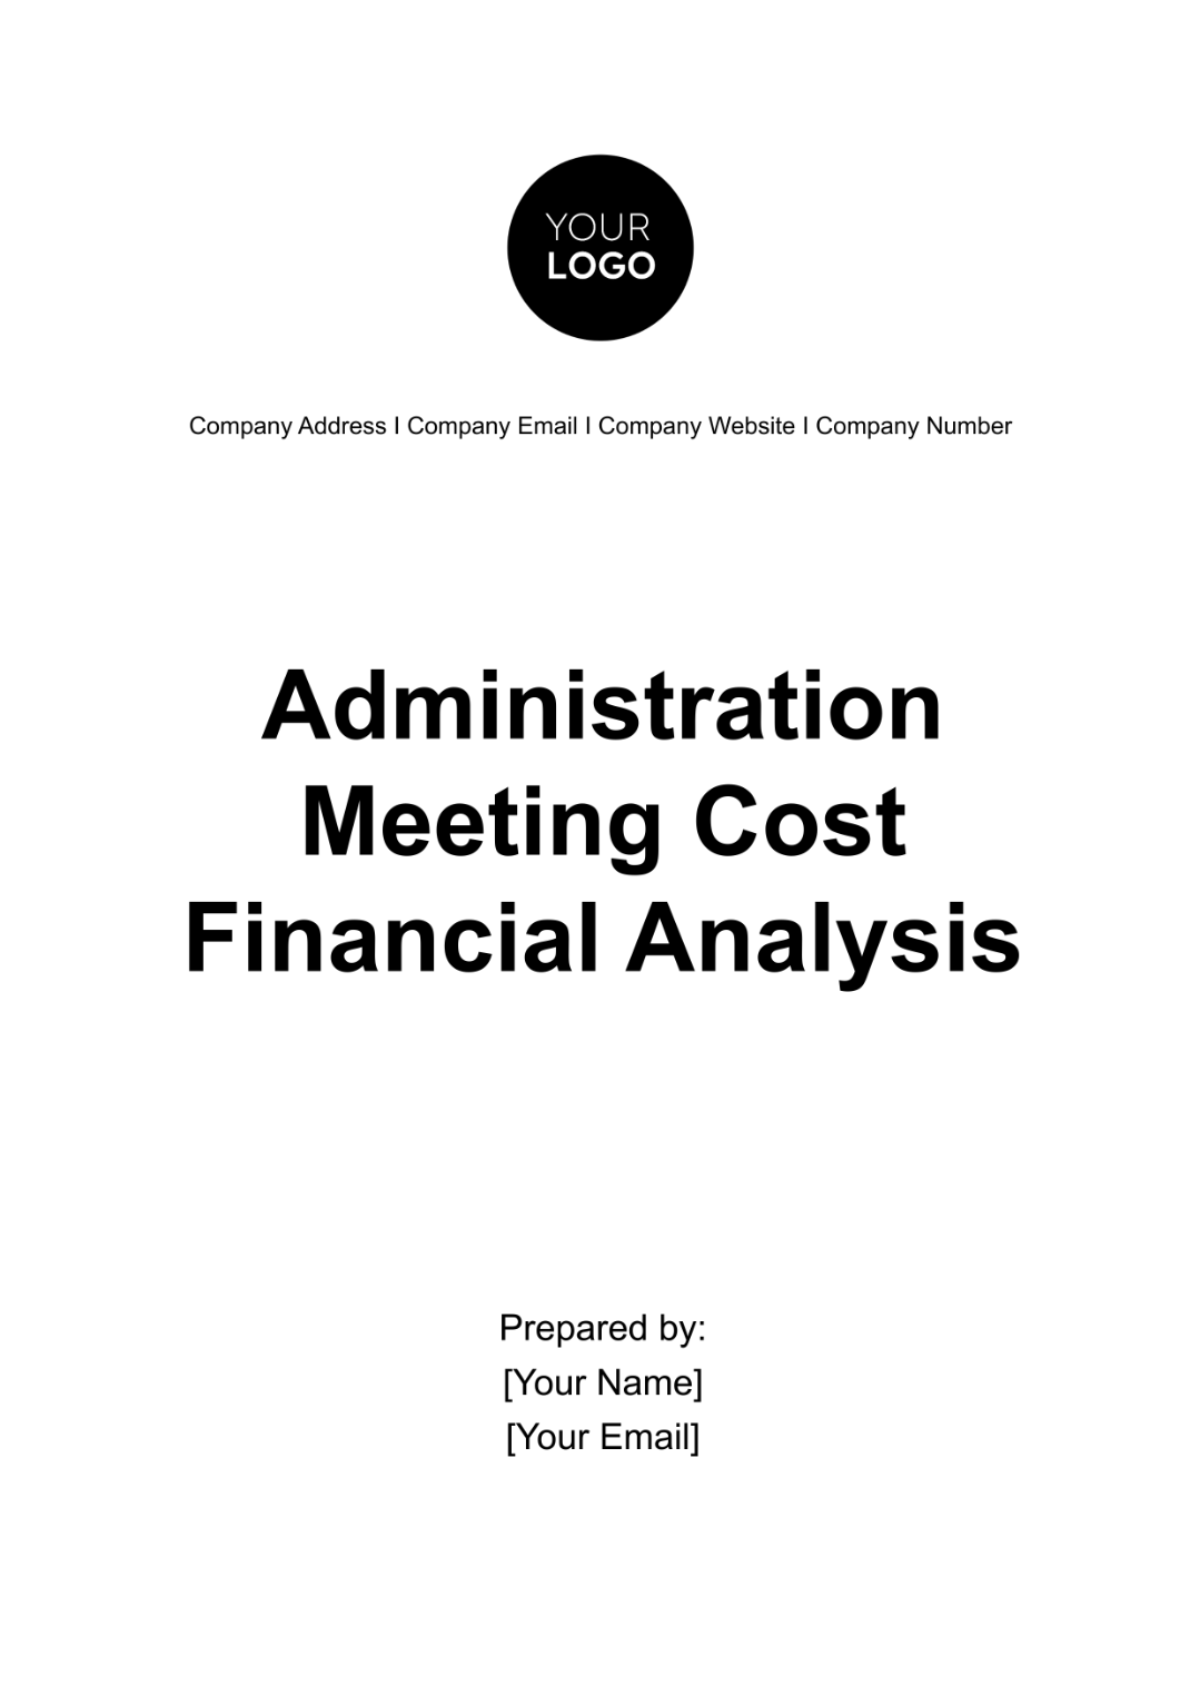 Administration Meeting Cost Financial Analysis Template